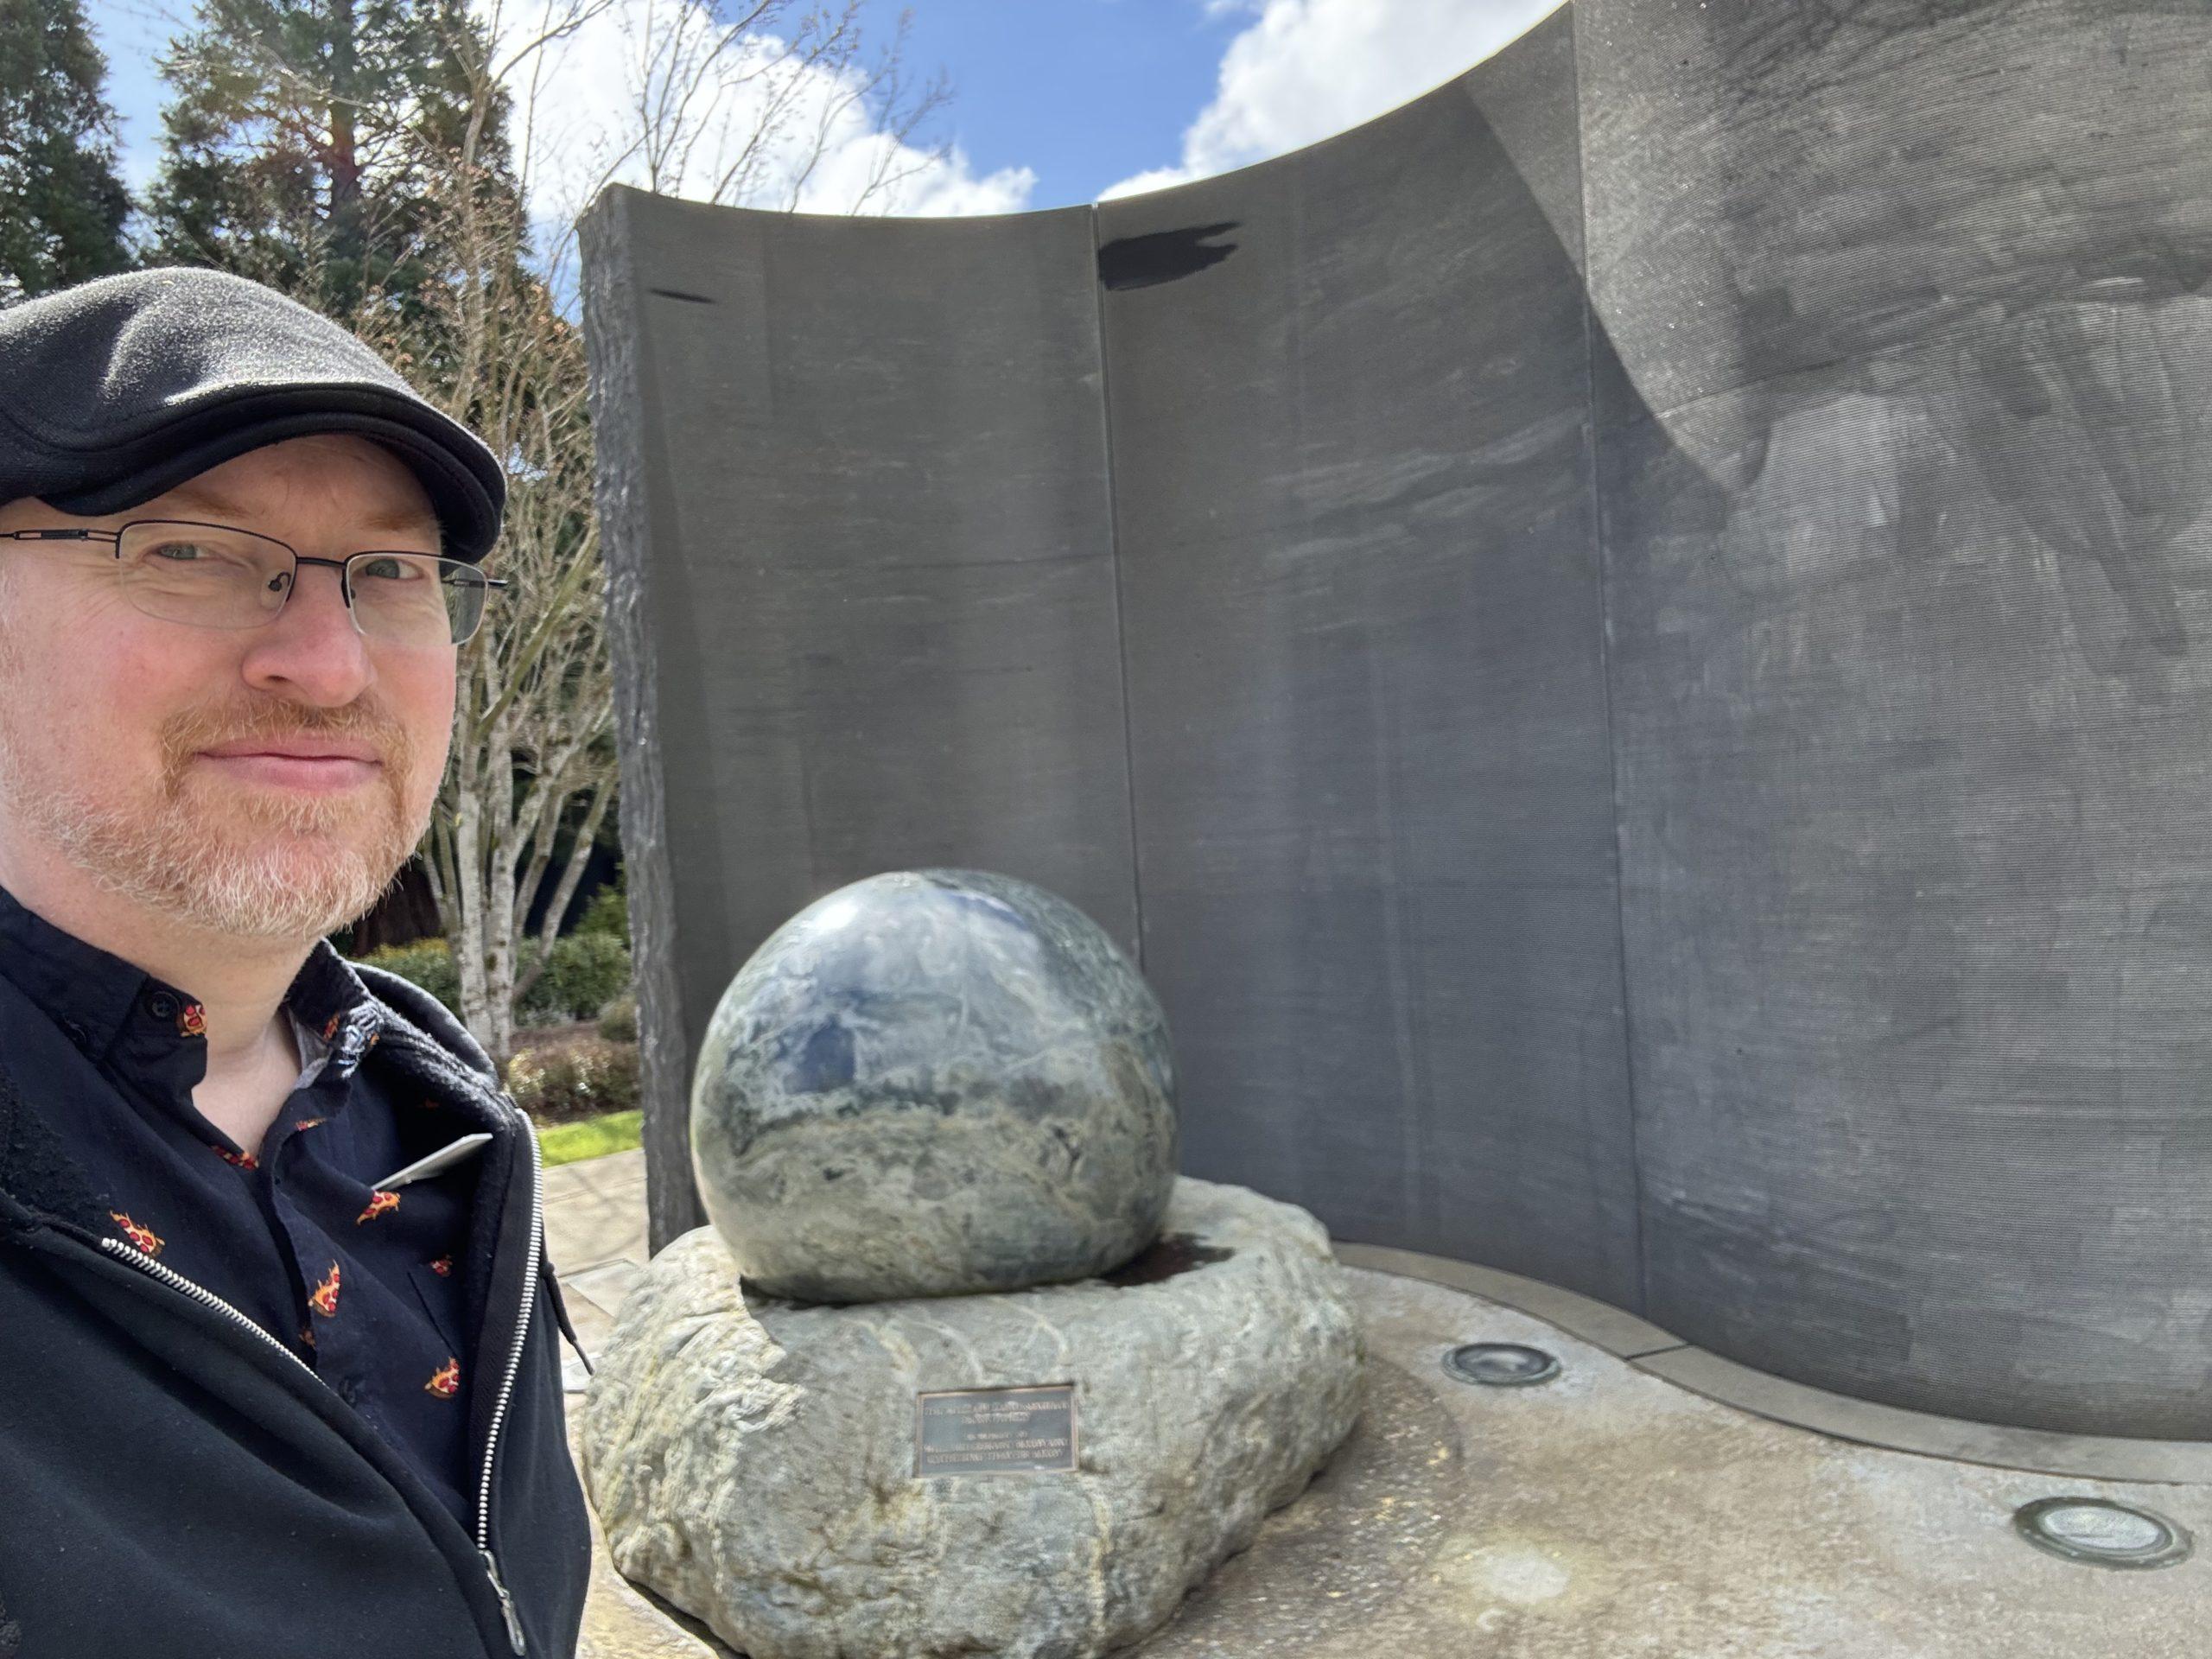 Me in front of an outdoor sculpture of a large spherical rock seated in a depression in another rock in front of a curved, textured grey wall.